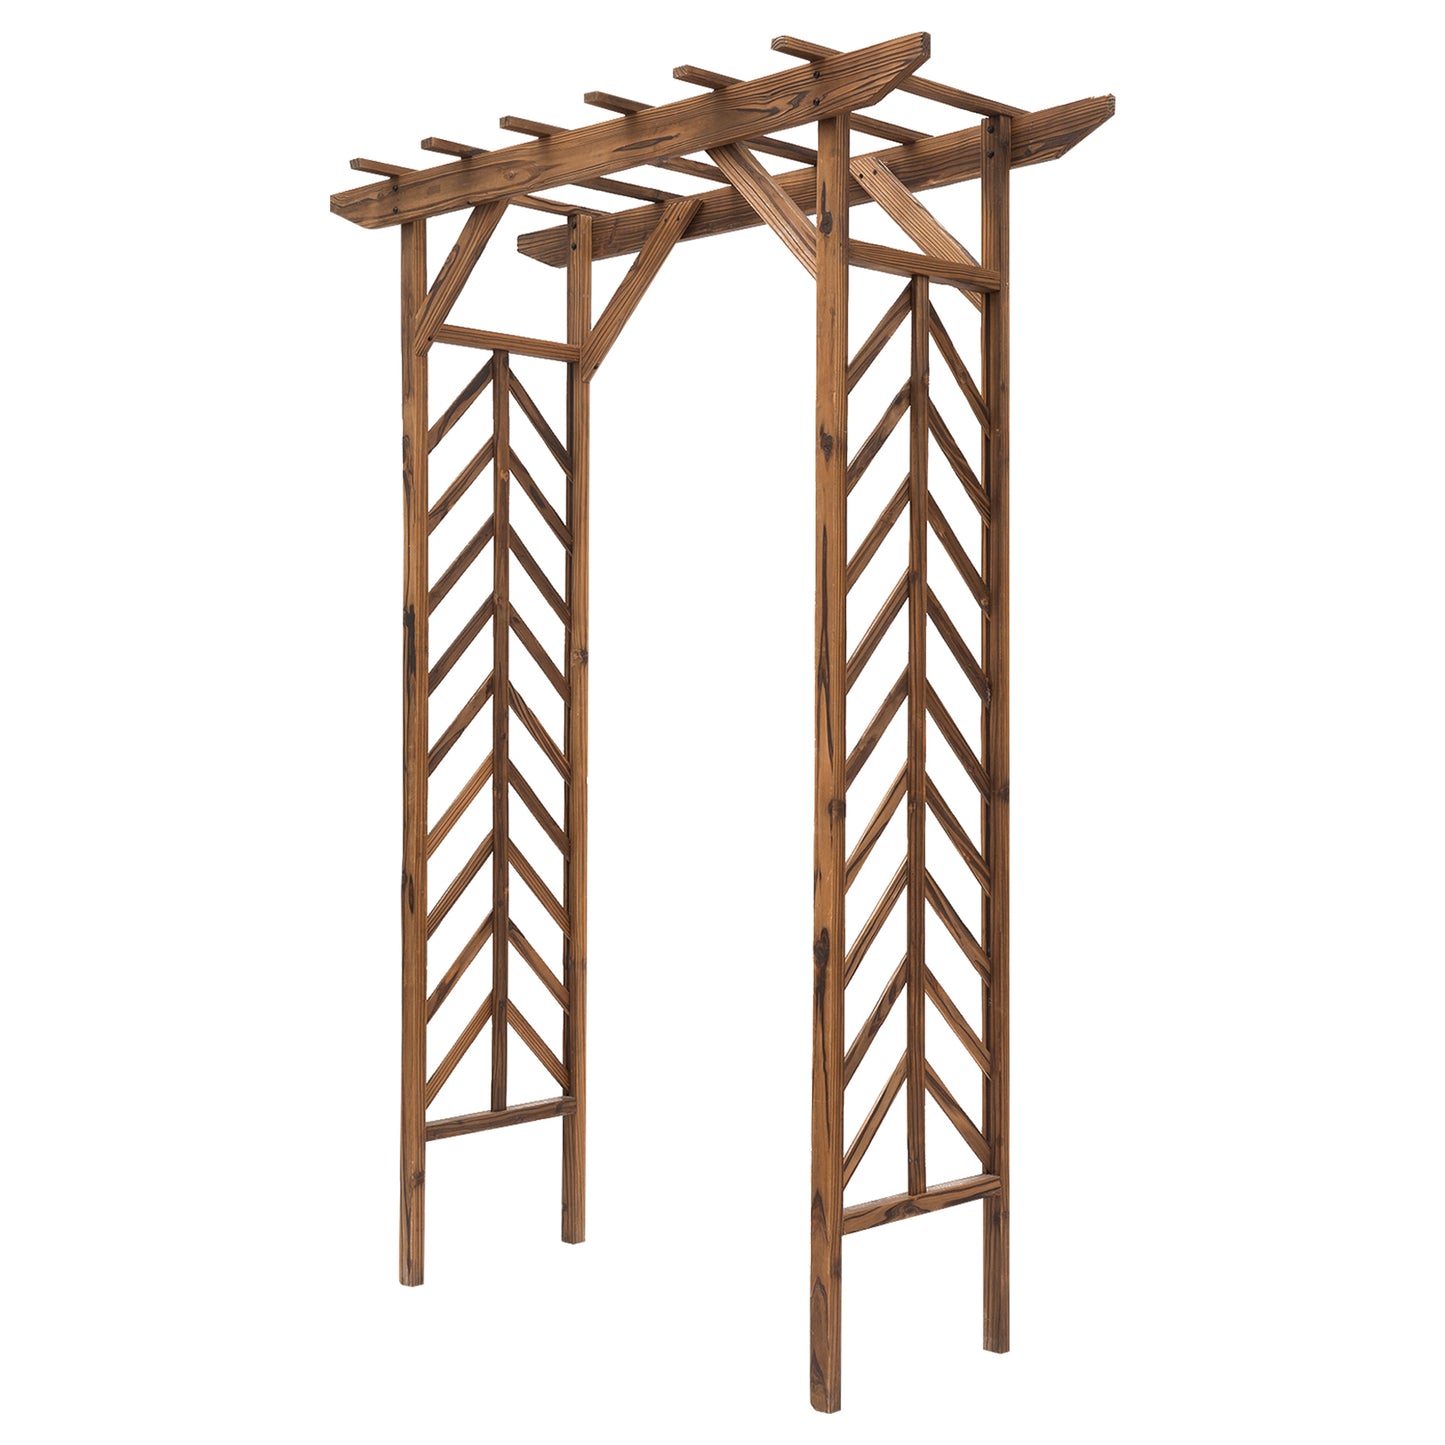 79" Plant Trellis, Arched Garden Arbour with Pergola Style Roof, Fir Wood Frame for Climbing Vines at Gallery Canada